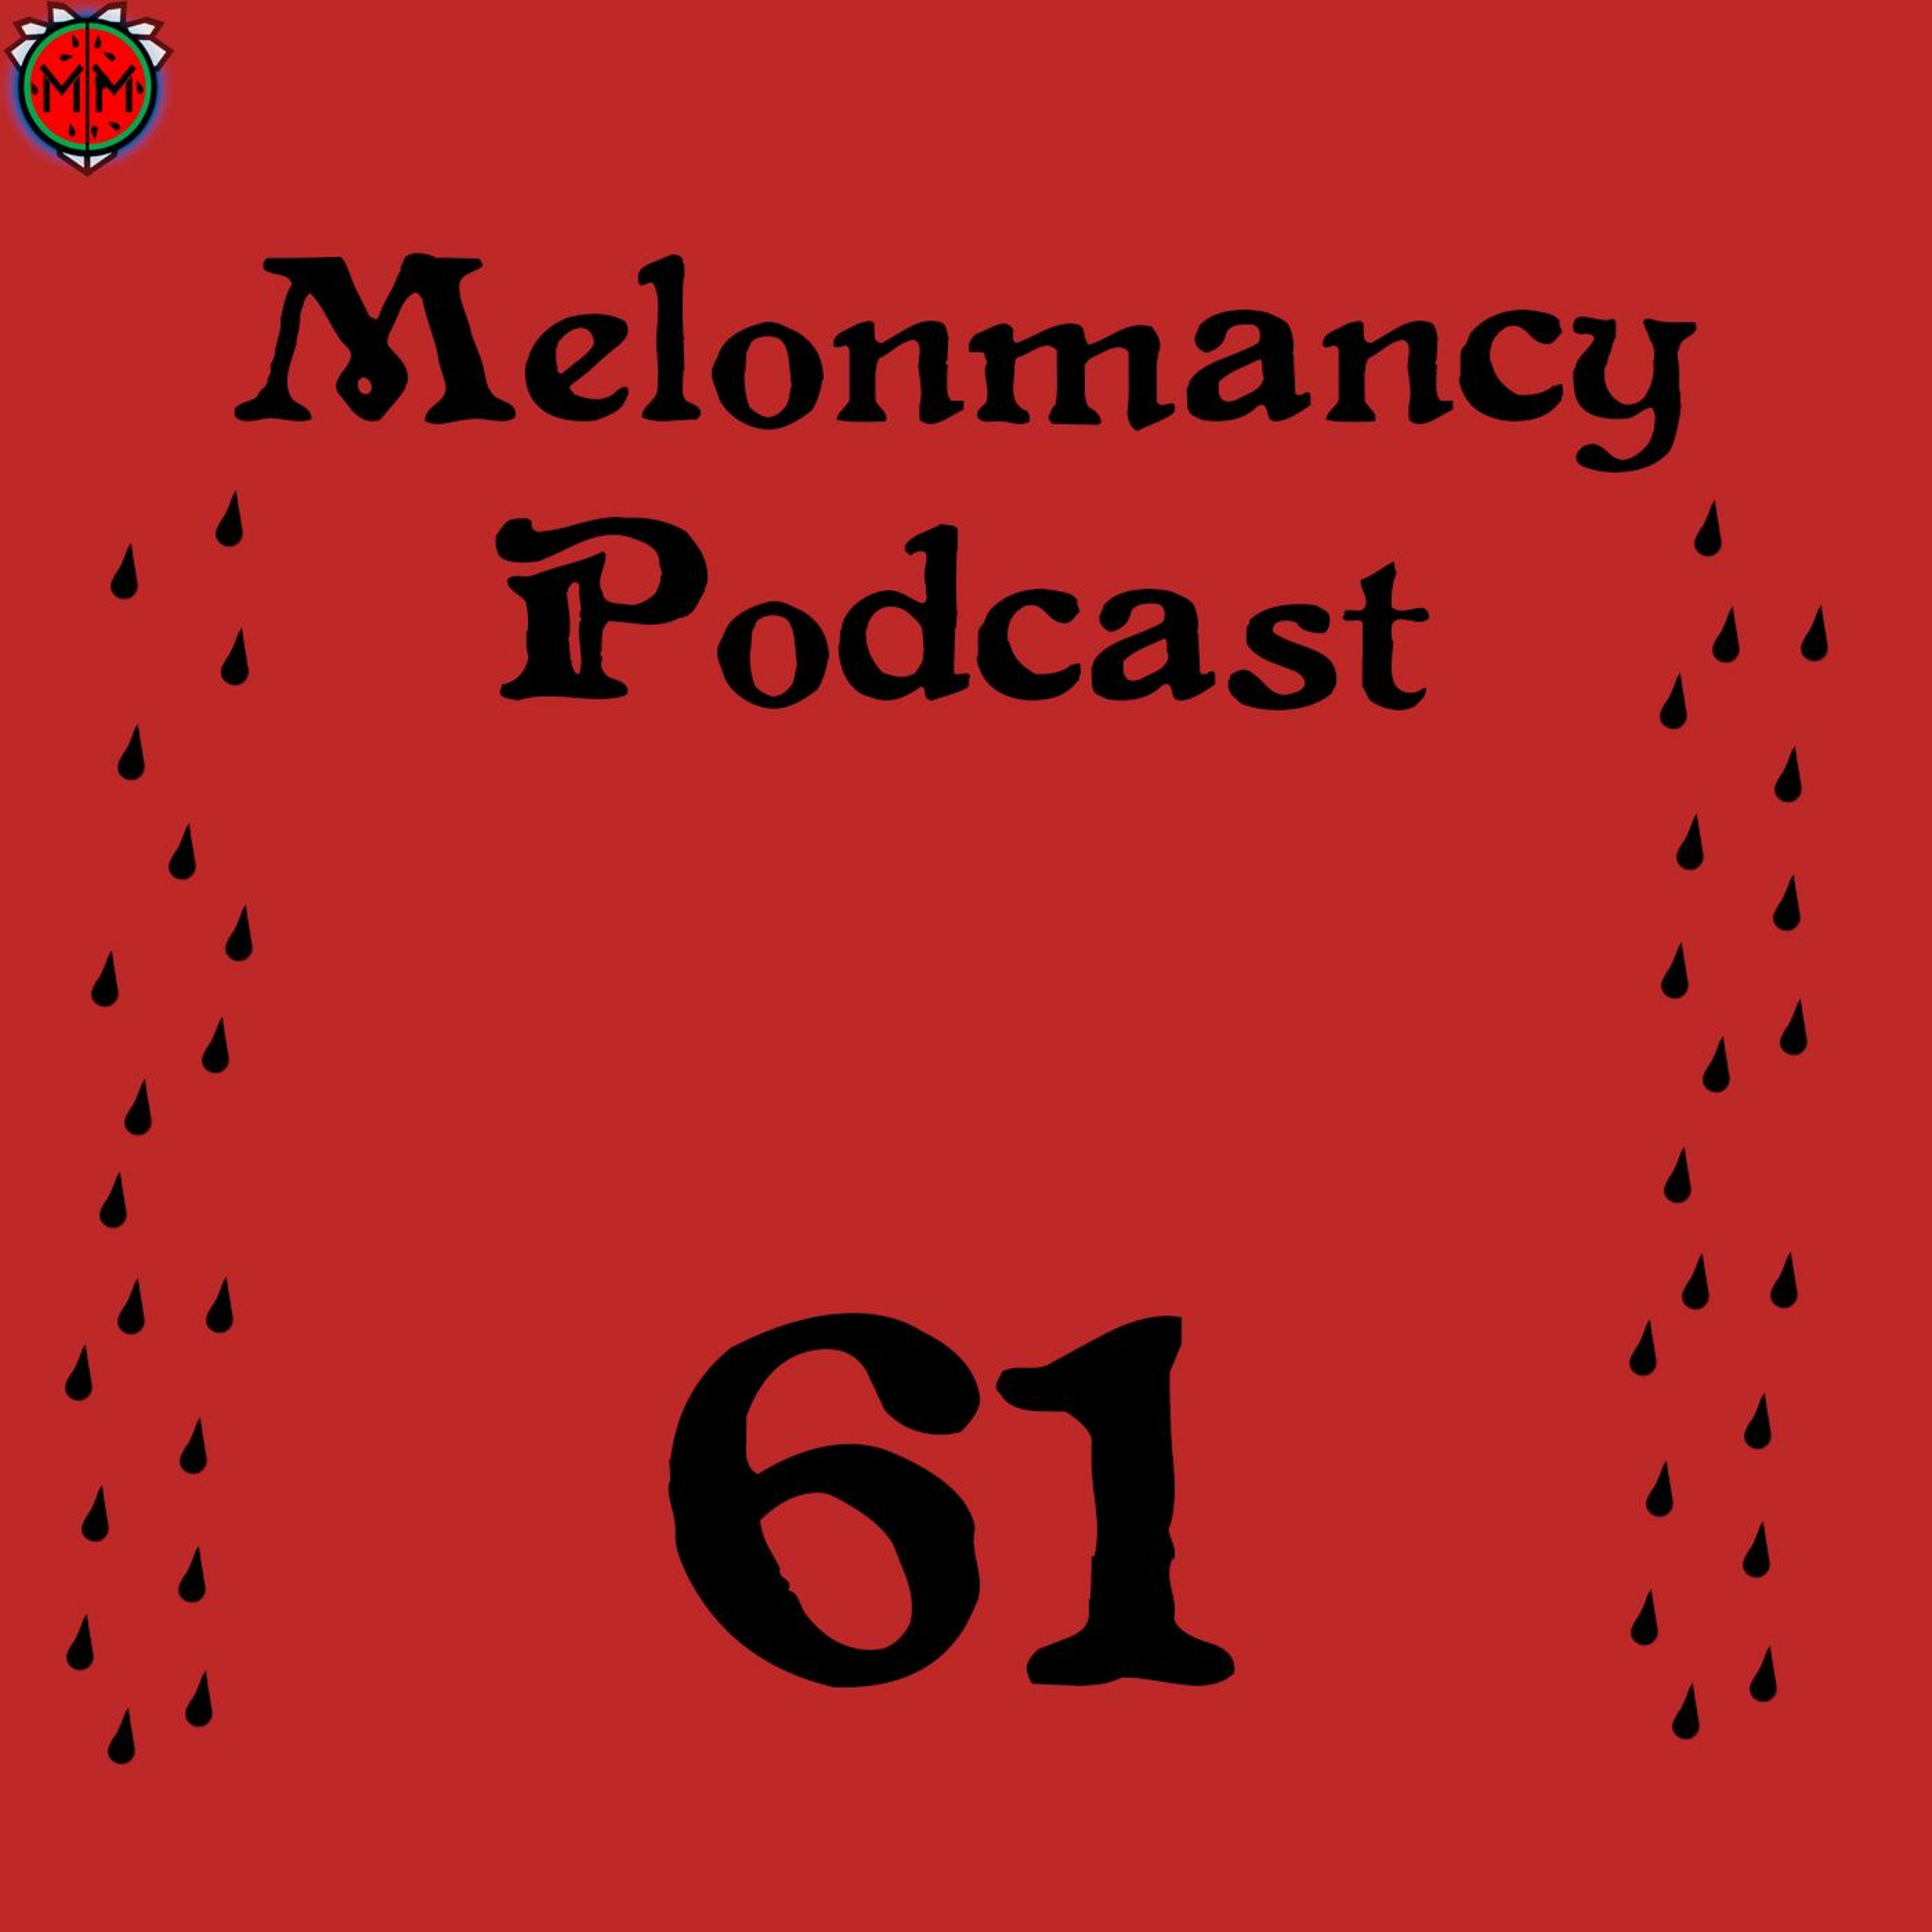 MP#61 - A blogger in journalist's clothing